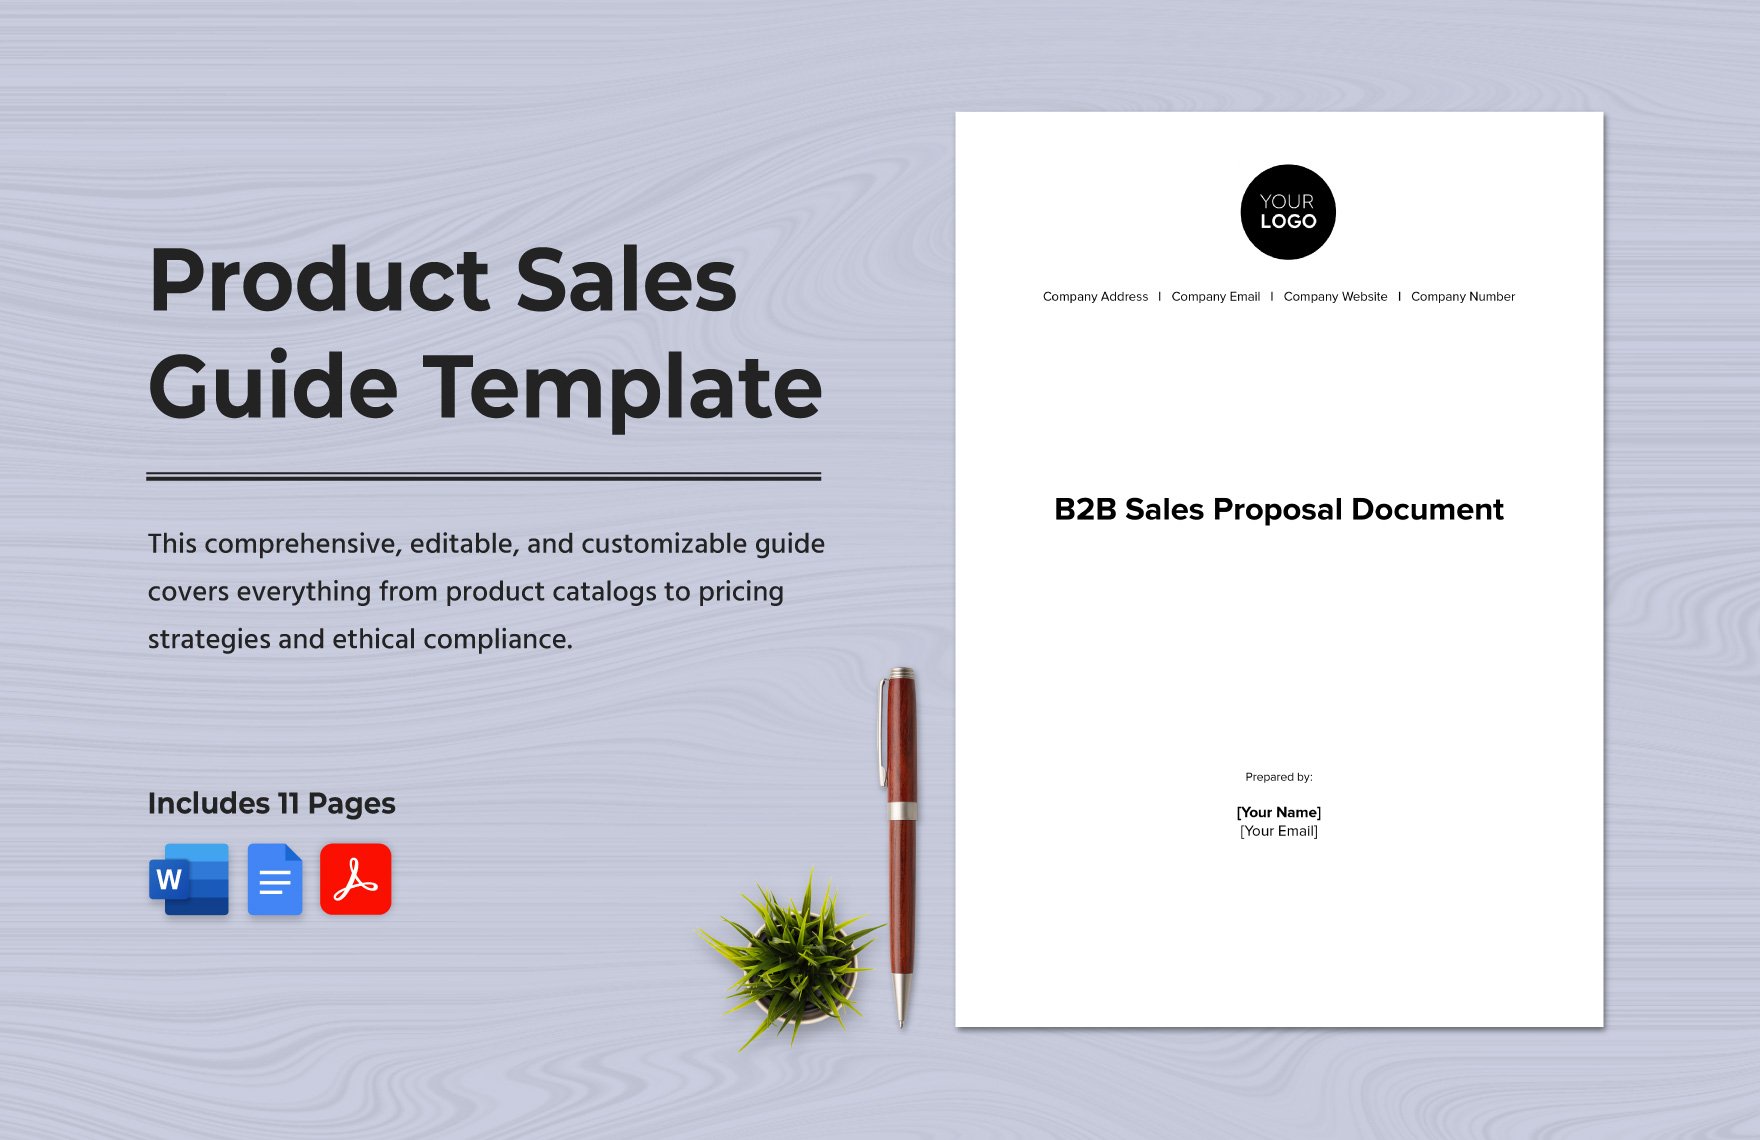 Product Sales Guide Template in Word, Google Docs, PDF